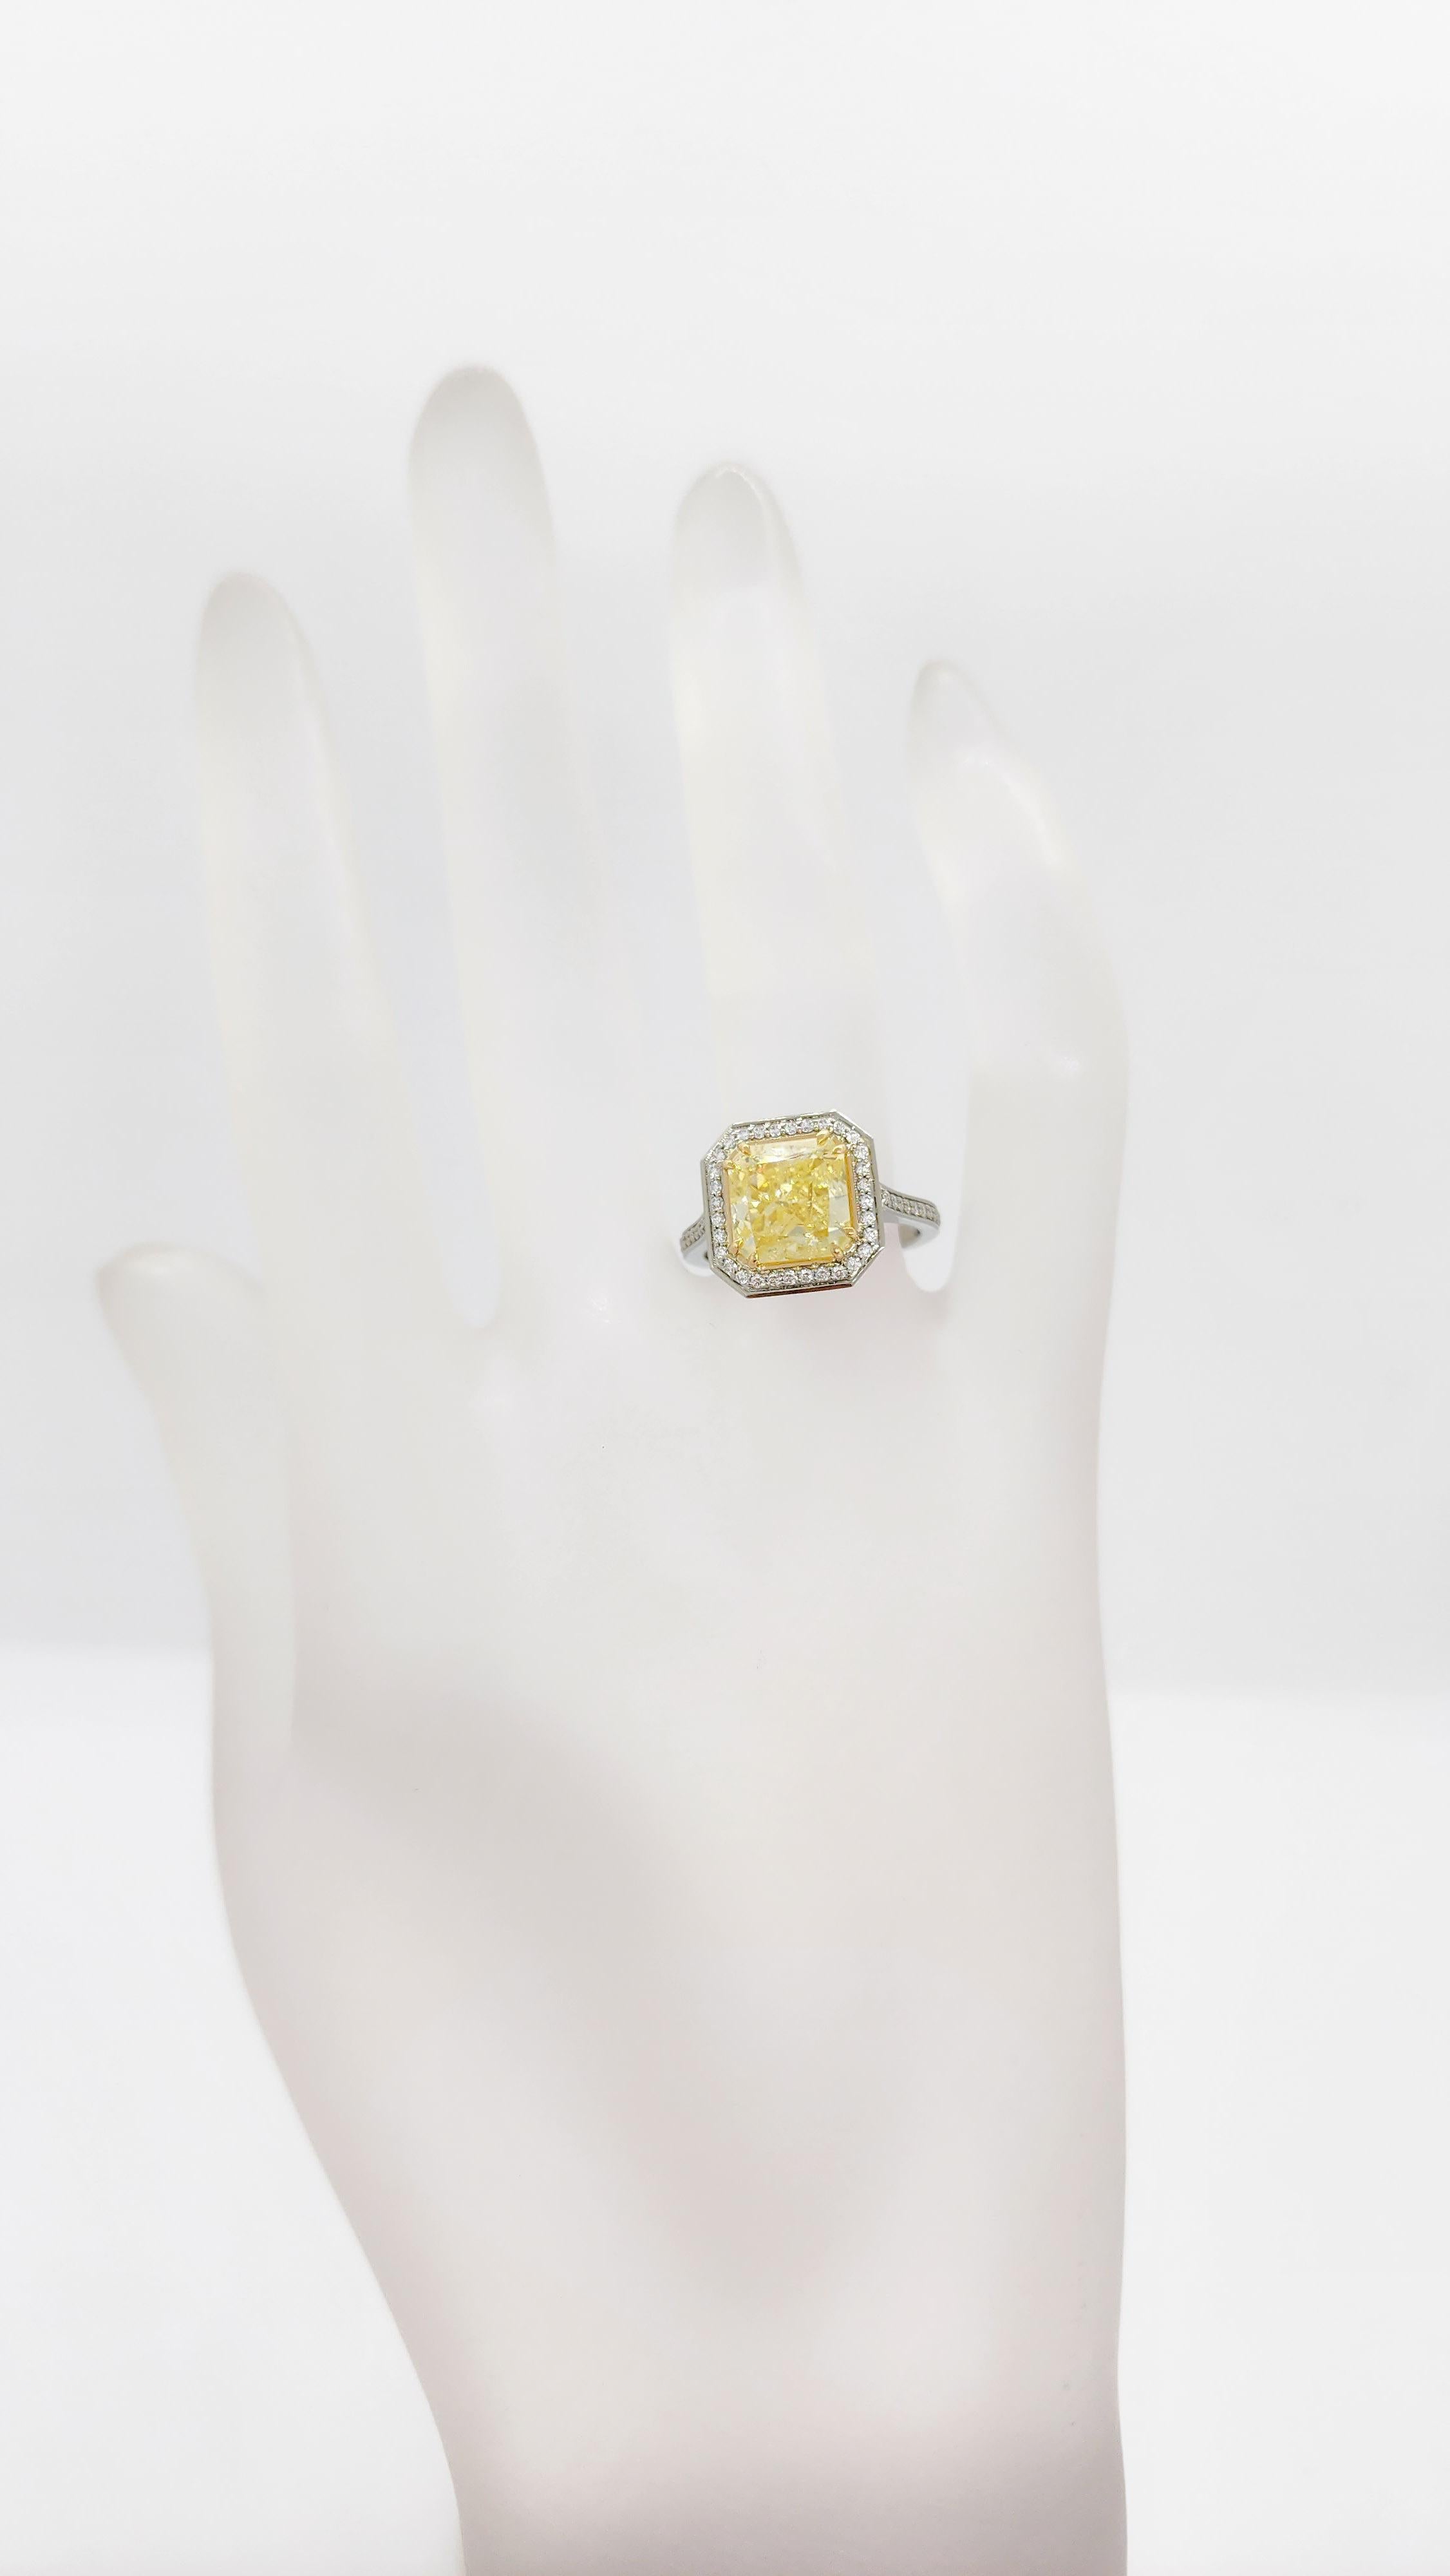 GIA Fancy Yellow Radiant and White Diamond Ring in 18k For Sale 4